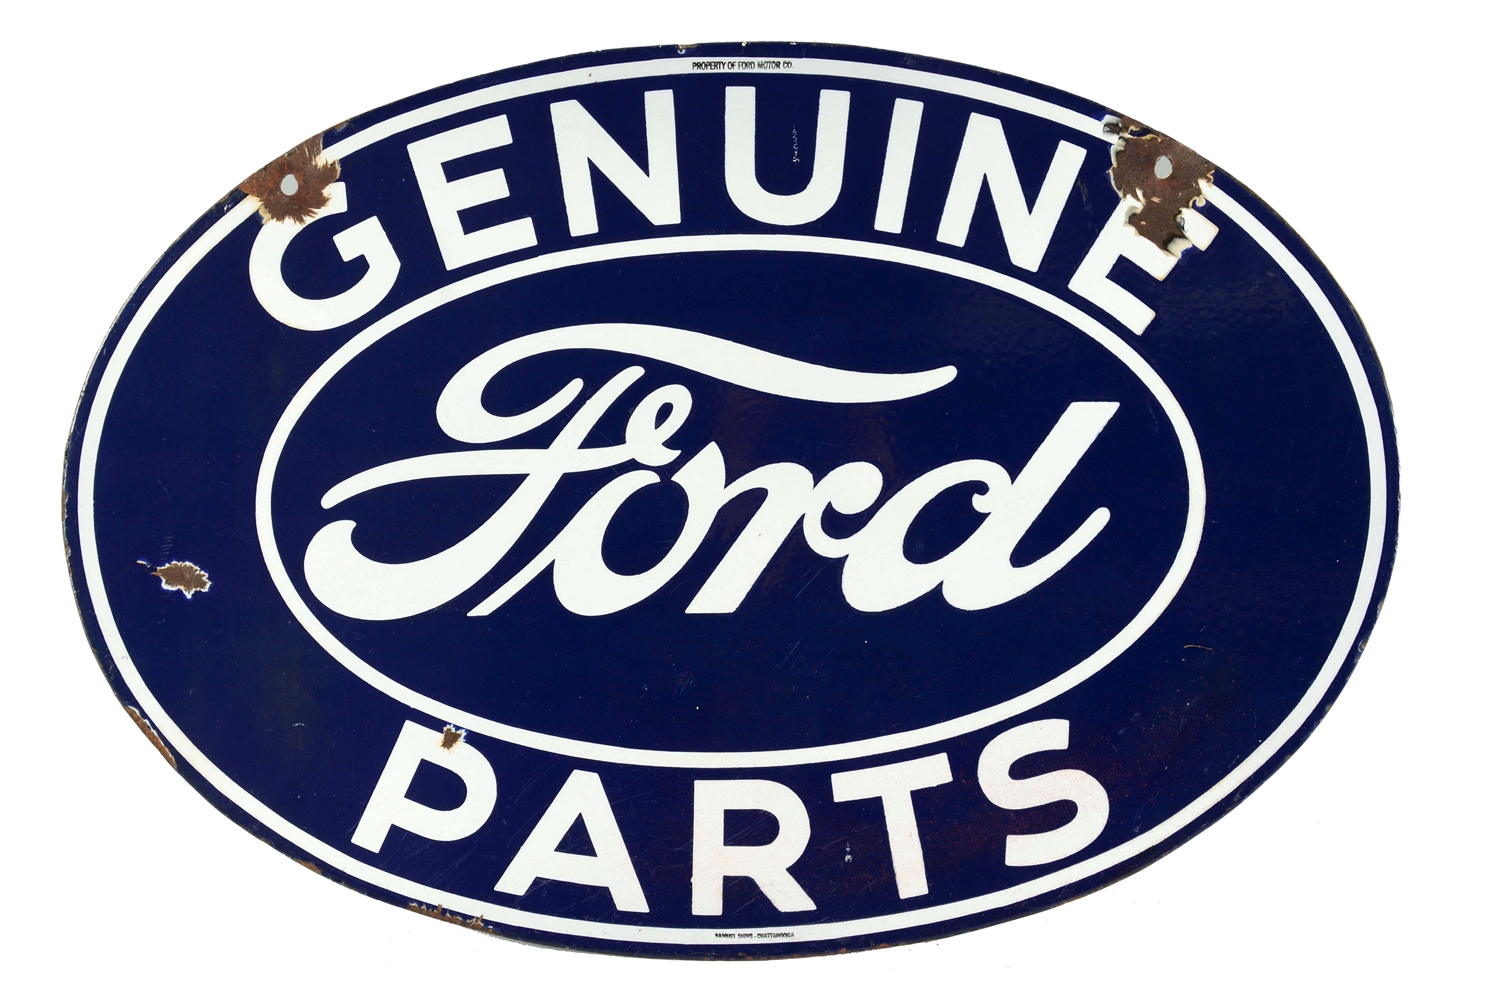 FORD GENUINE PARTS DOUBLE SIDED PORCELAIN SIGN.